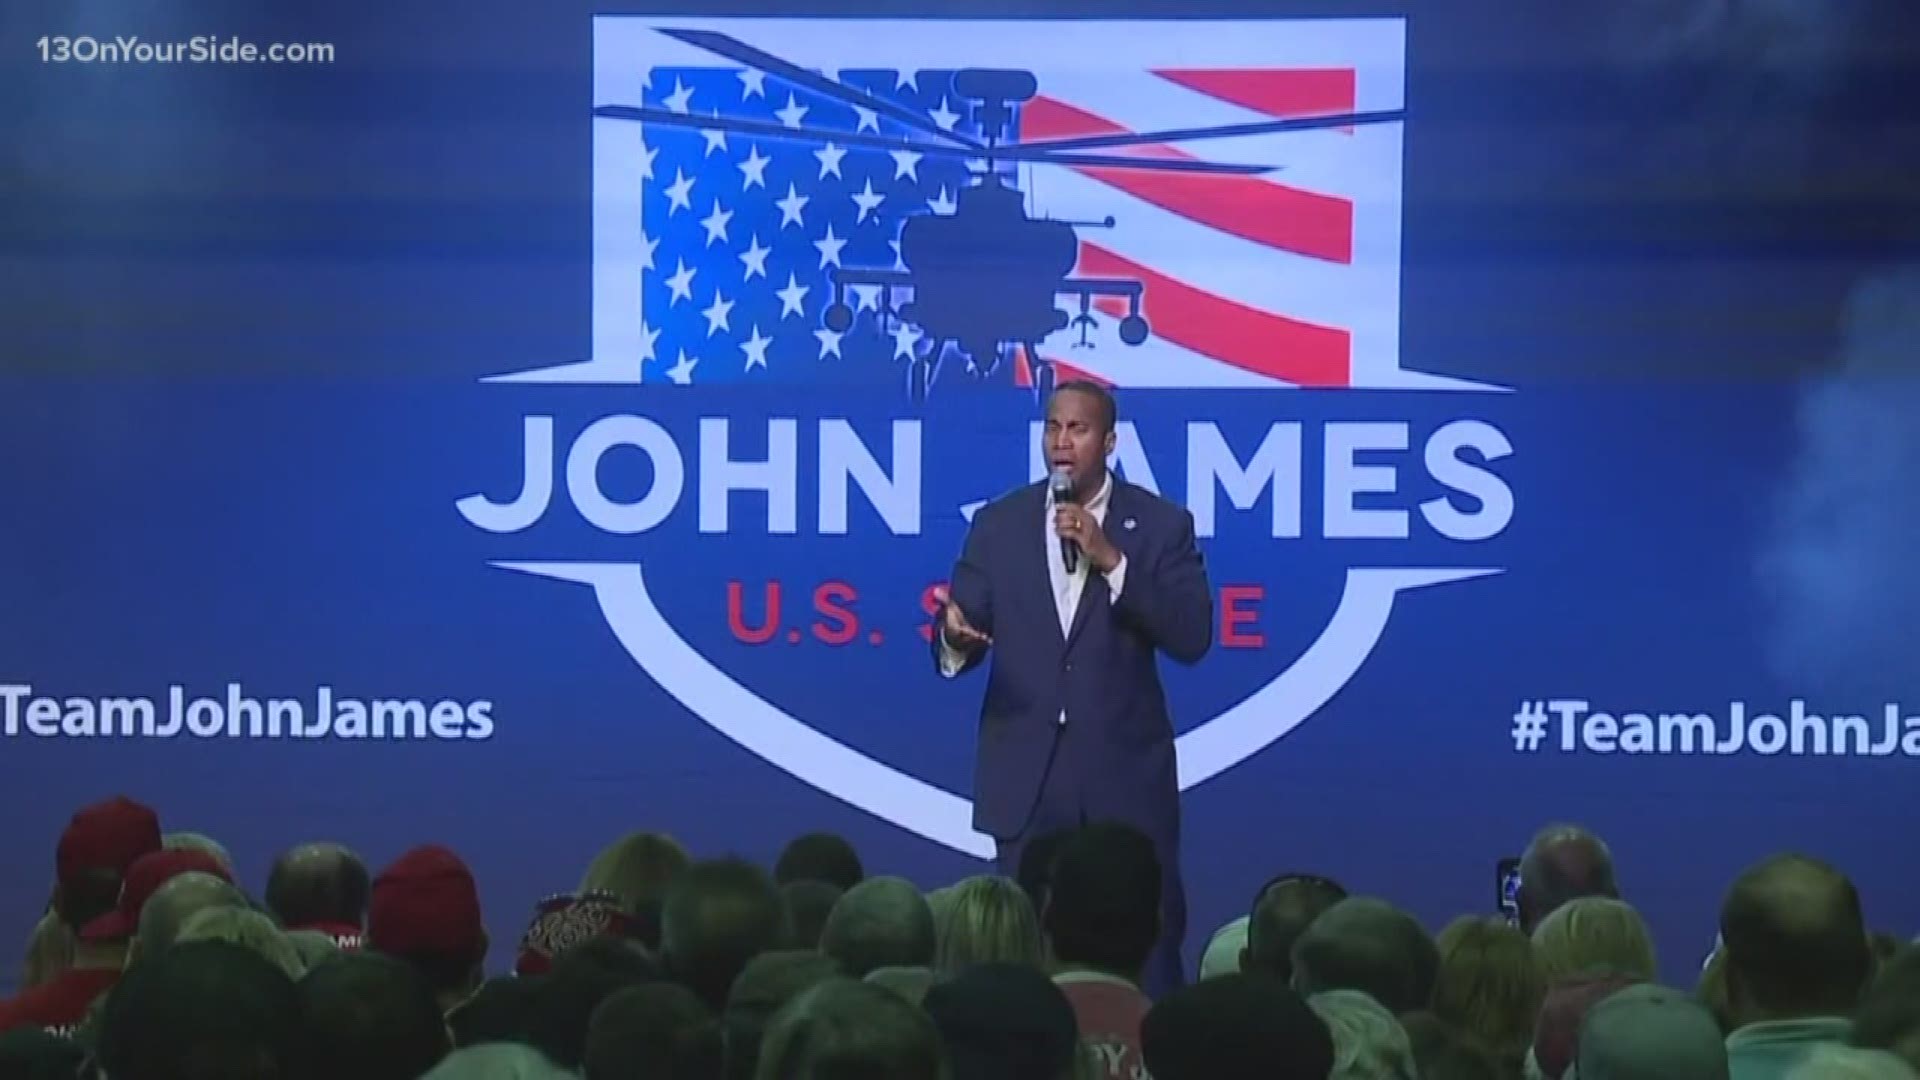 Republican Senate candidate John James collected more than 23, 500 signatures to put him on the ballot.